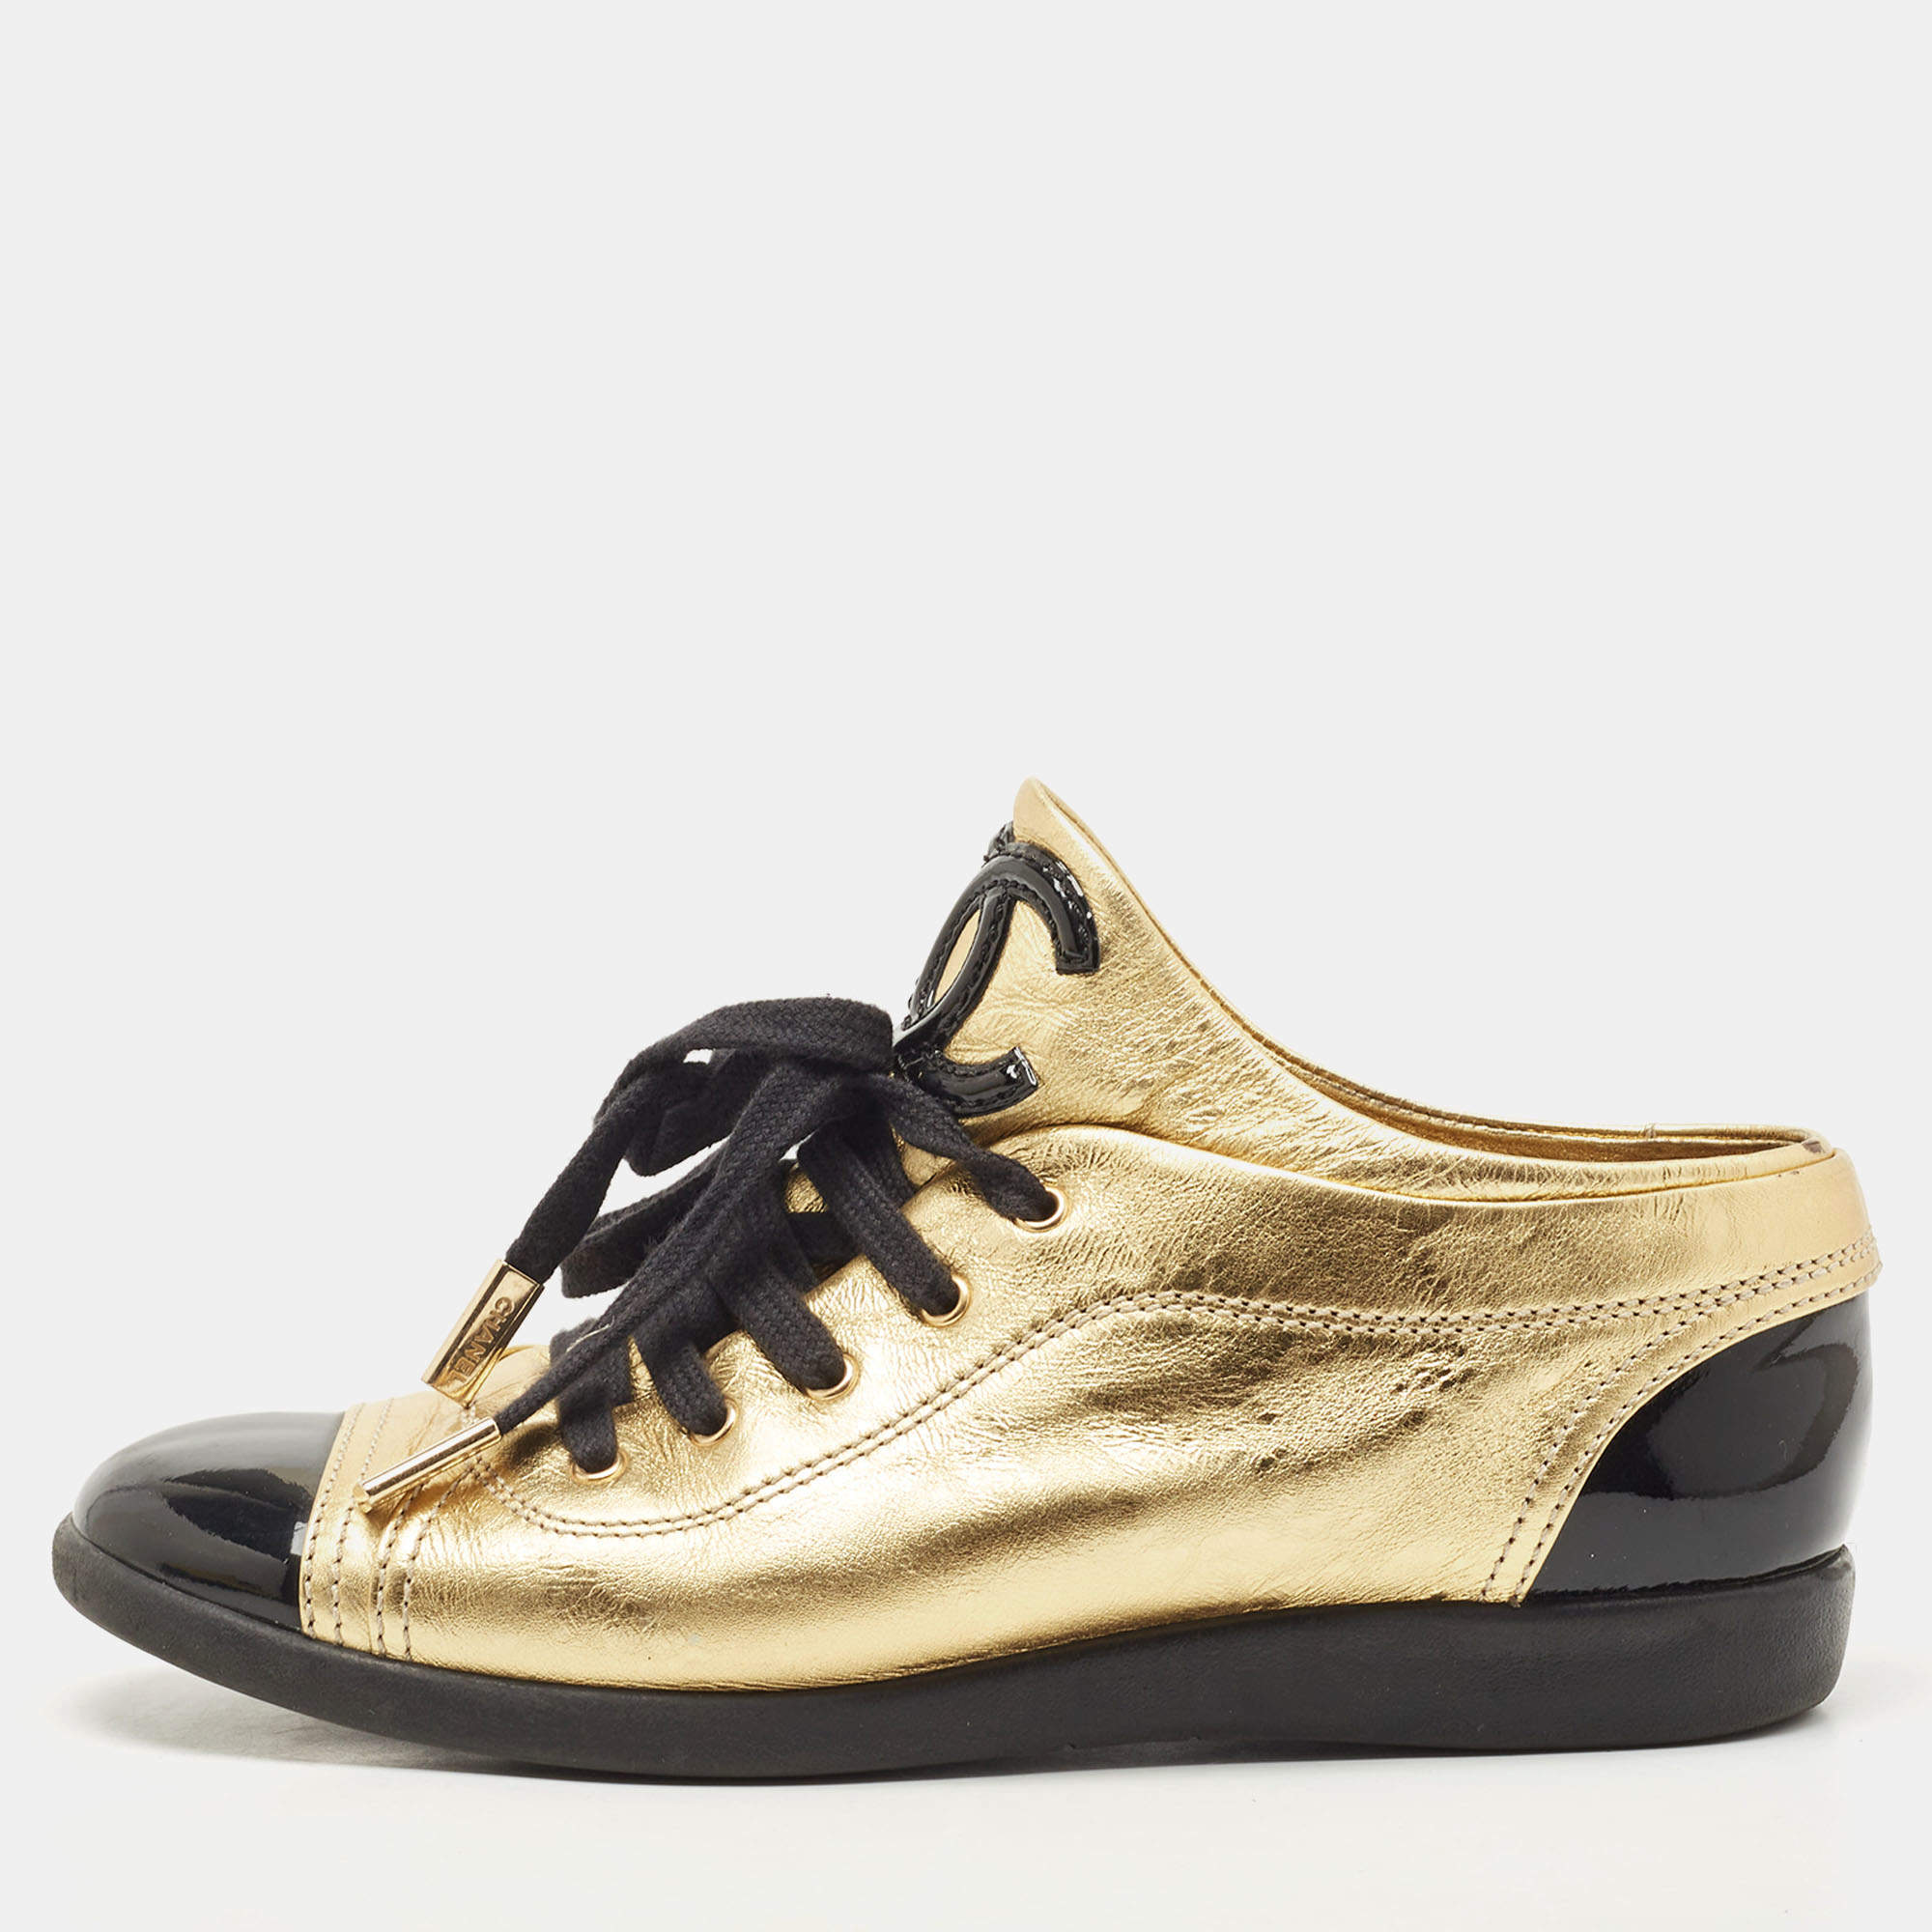 Chanel Womens Lace Up Metallic Low Top Sneakers Gold Tone Suede Size 37